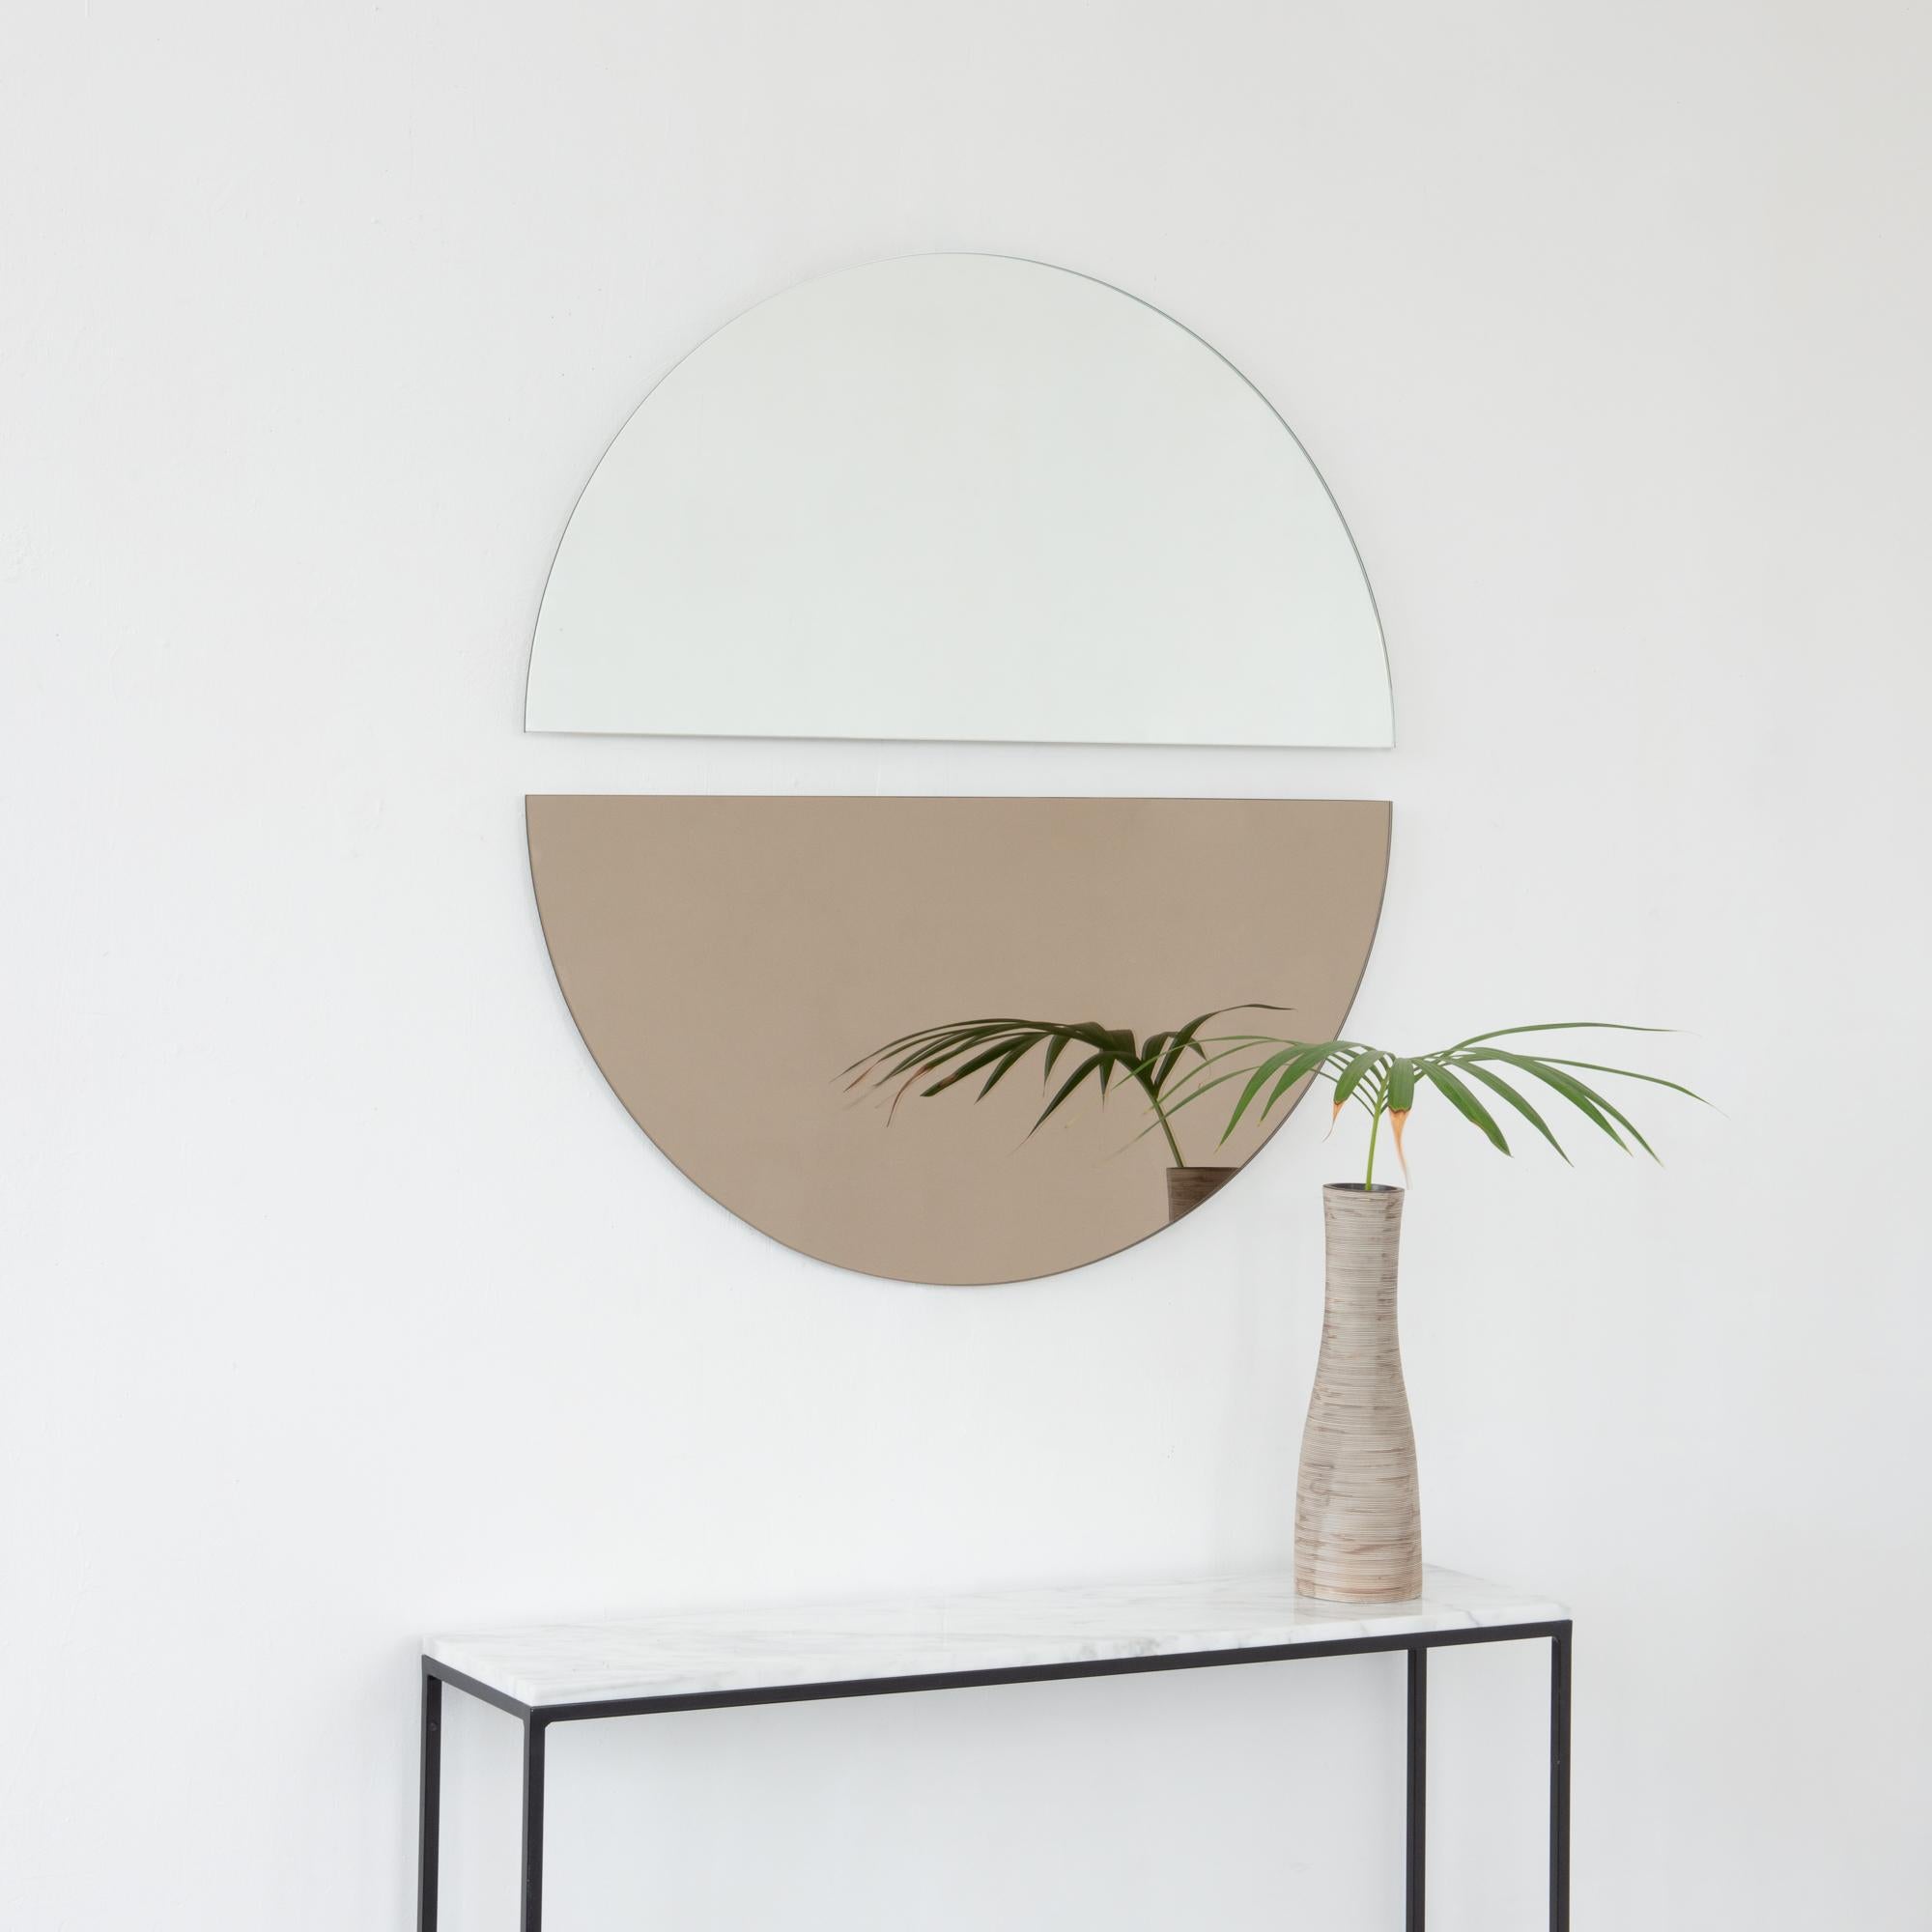 Set of two minimalist half-moon Luna™ standard silver + bronze tinted frameless mirrors with a floating effect. Fitted with a quality and ingenious hanging system for a flexible installation in 4 different directions. Designed and made in London,